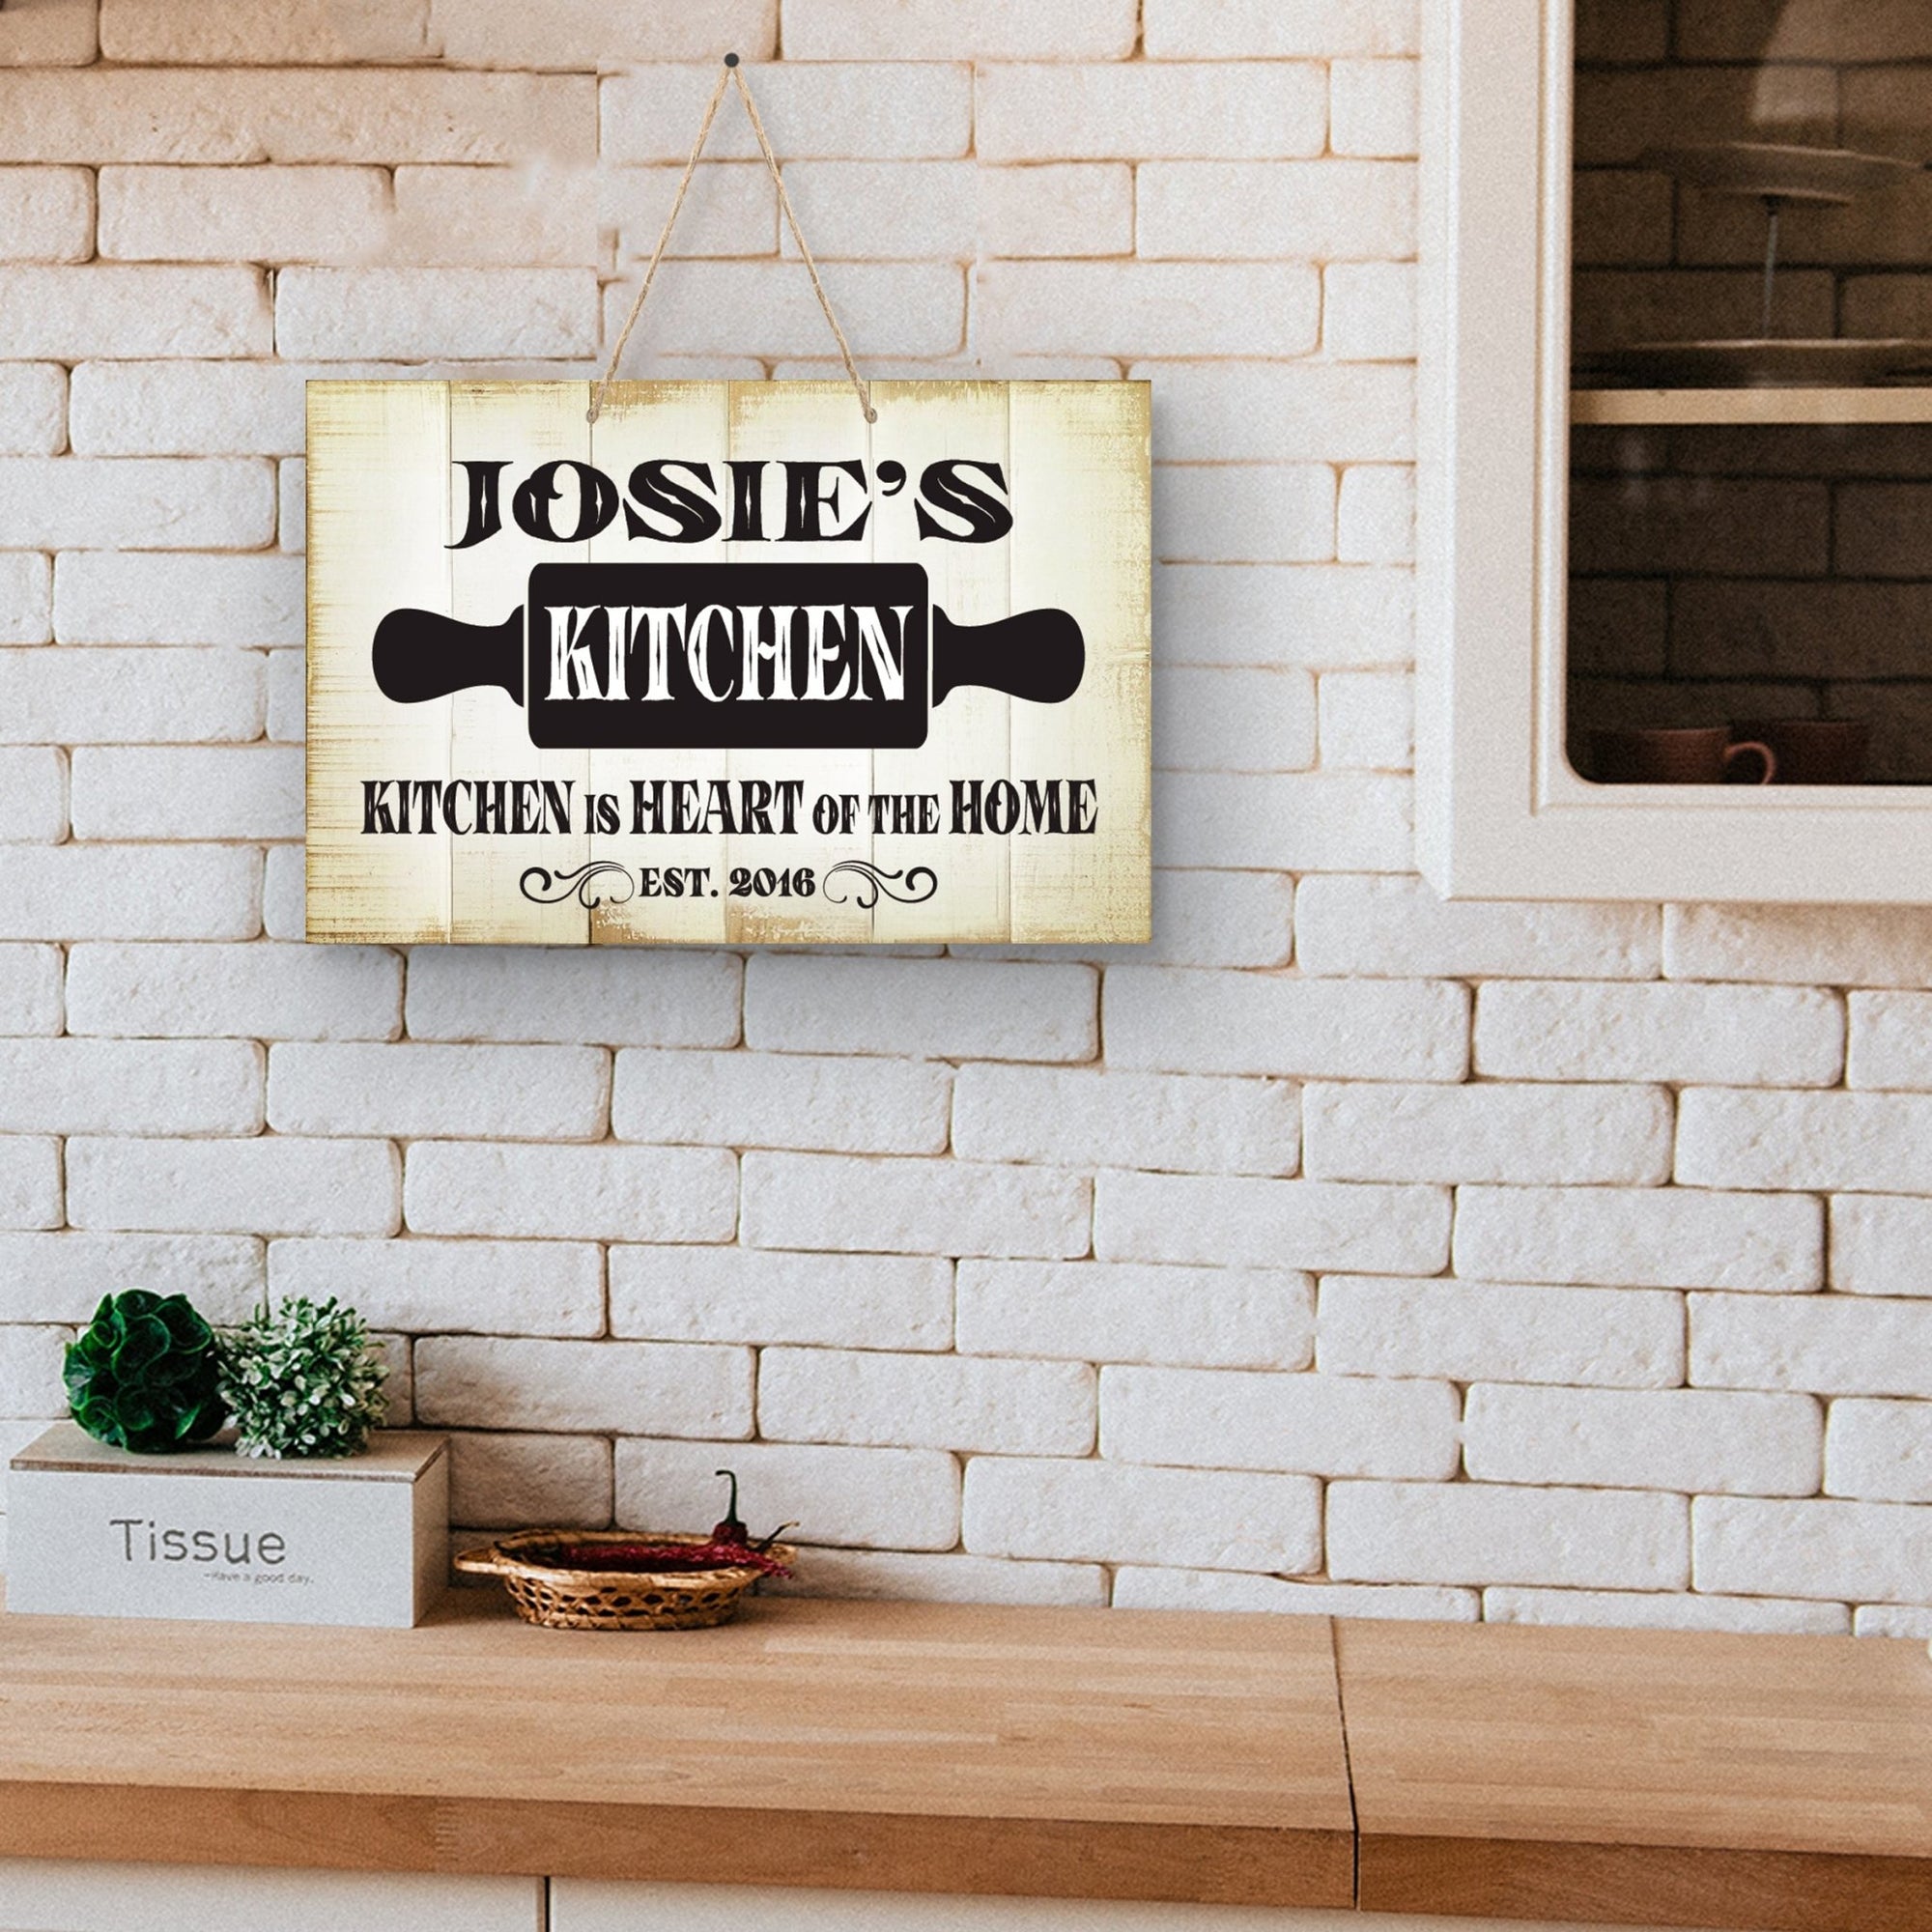 Inspirational Rustic Wooden Wall Hanging Rope Sign Kitchen Décor - Kitchen Is Heart